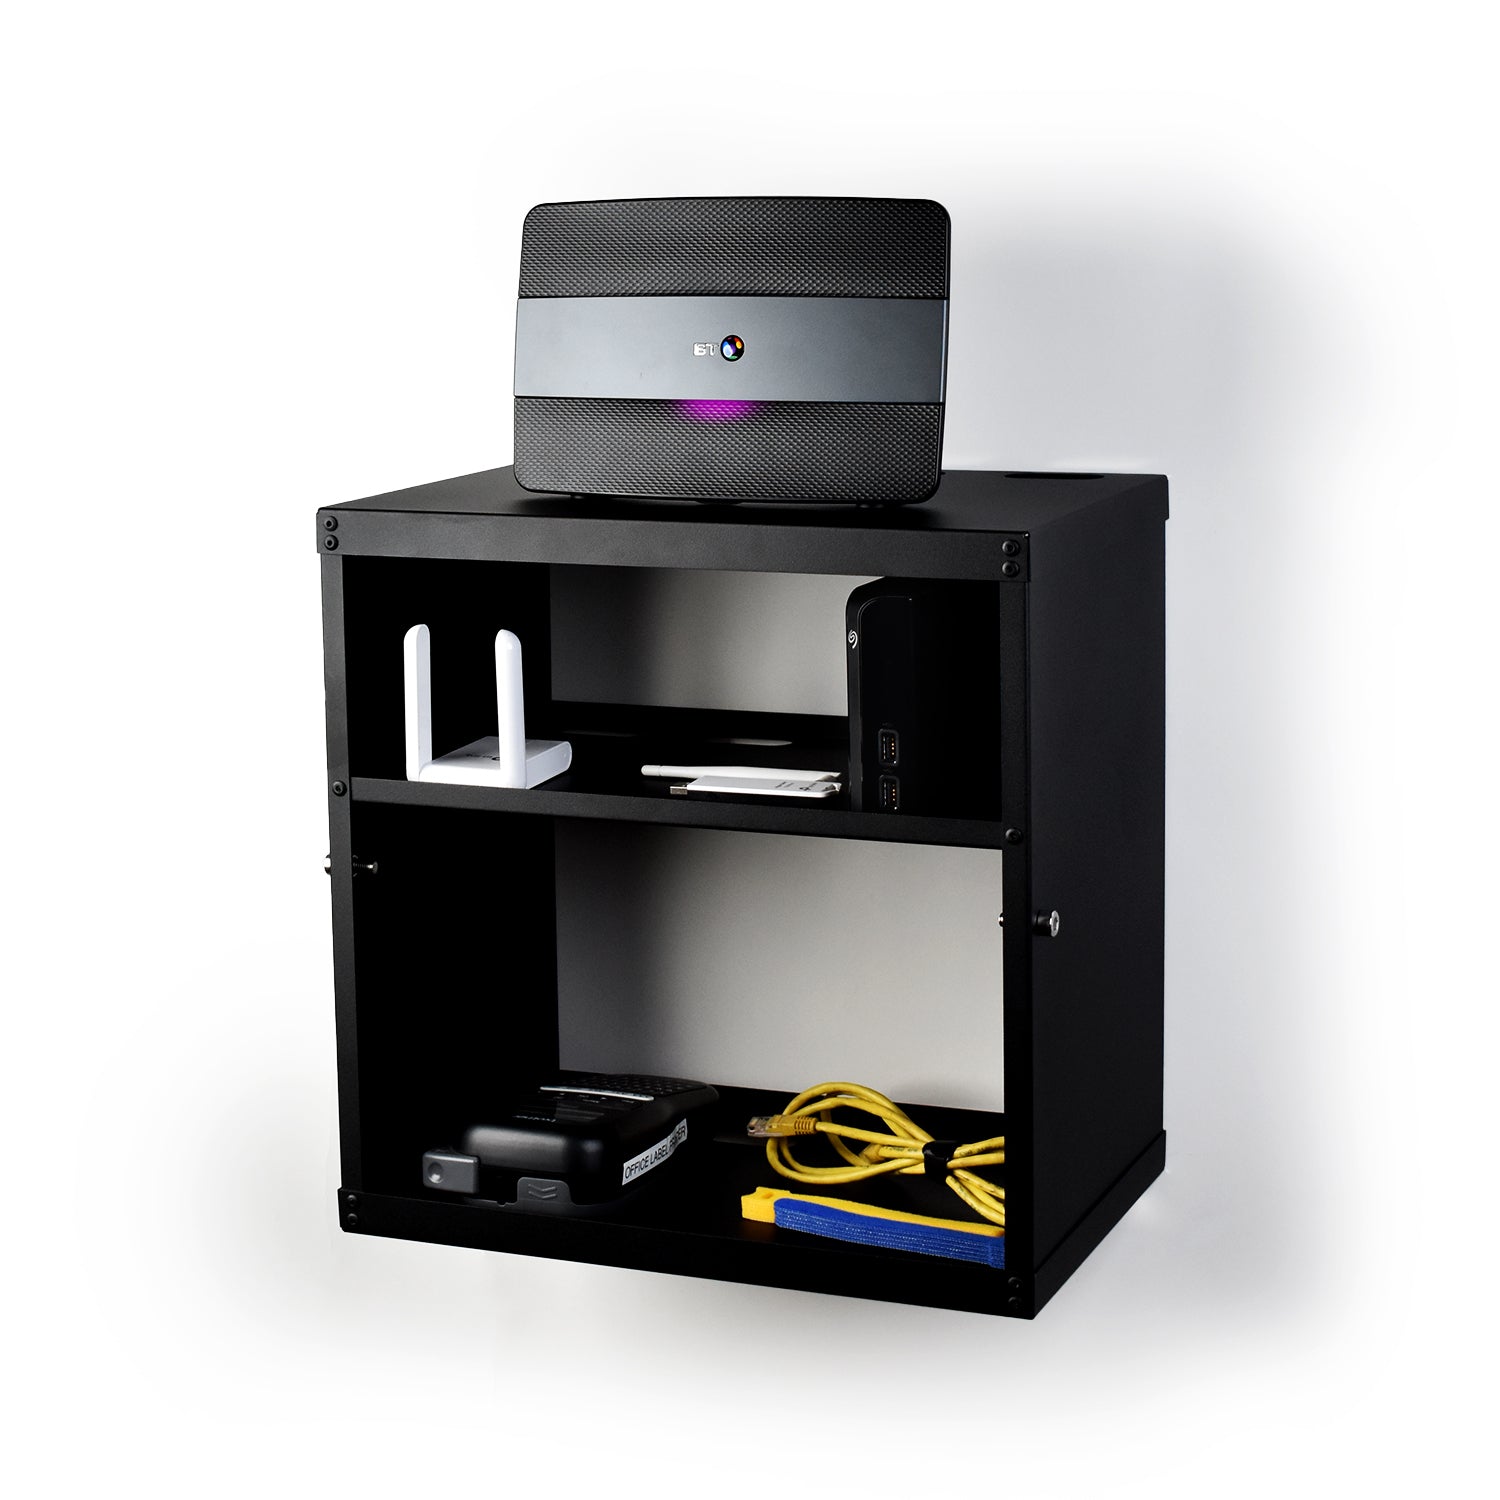 Okunaii Wi-Fi Router & Computer Supplies Wall Mount Cabinet